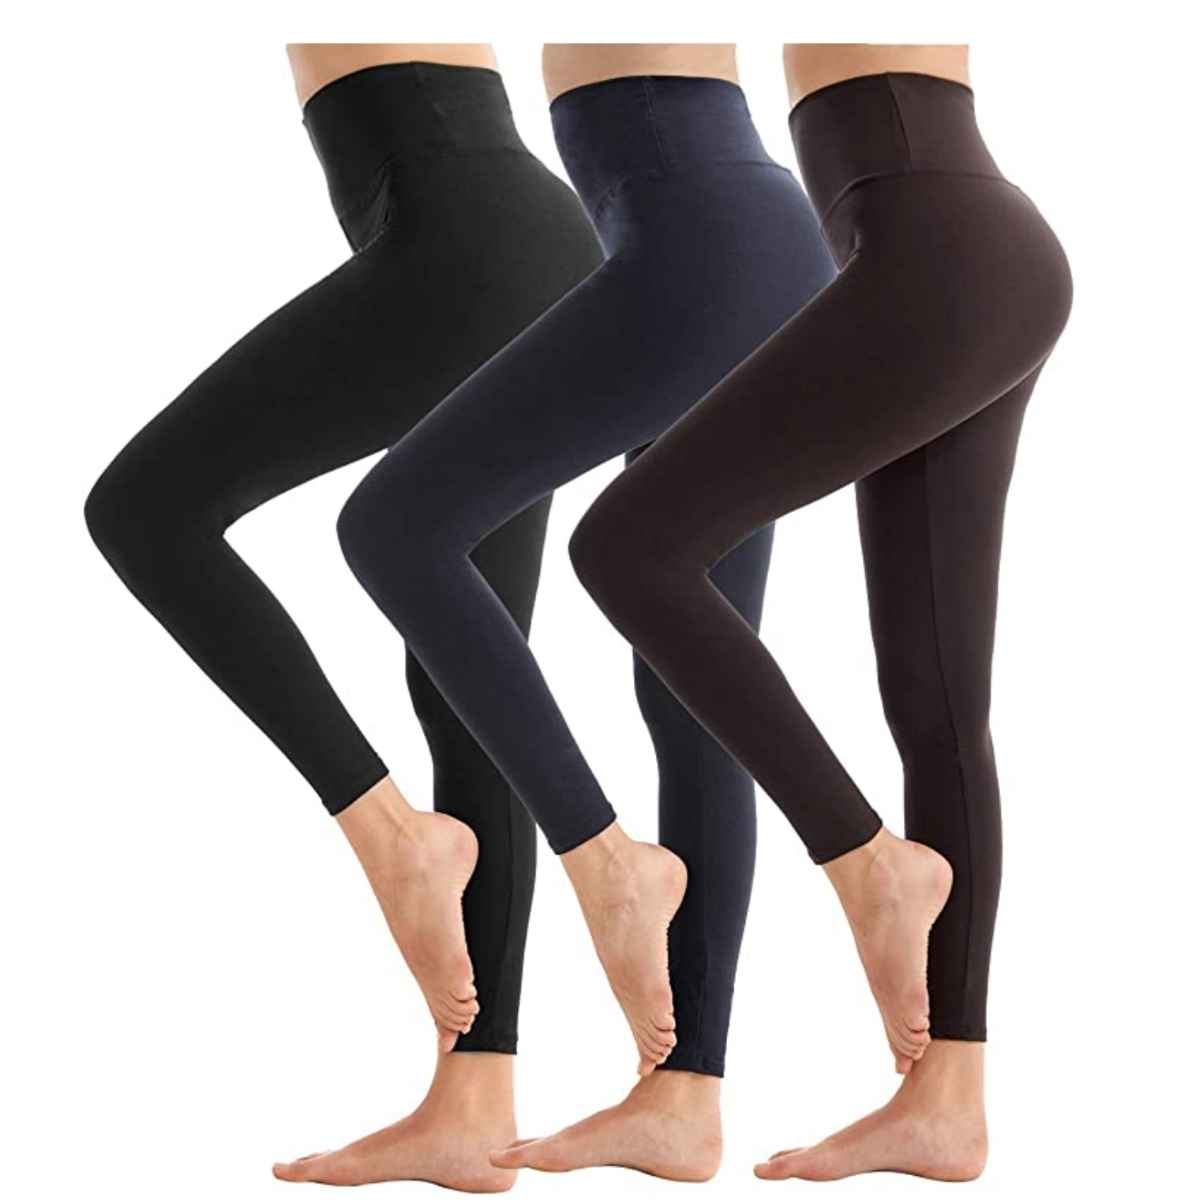 3-pack women's high-waisted leggings get discounted to $14+ (Reg. $28. ...